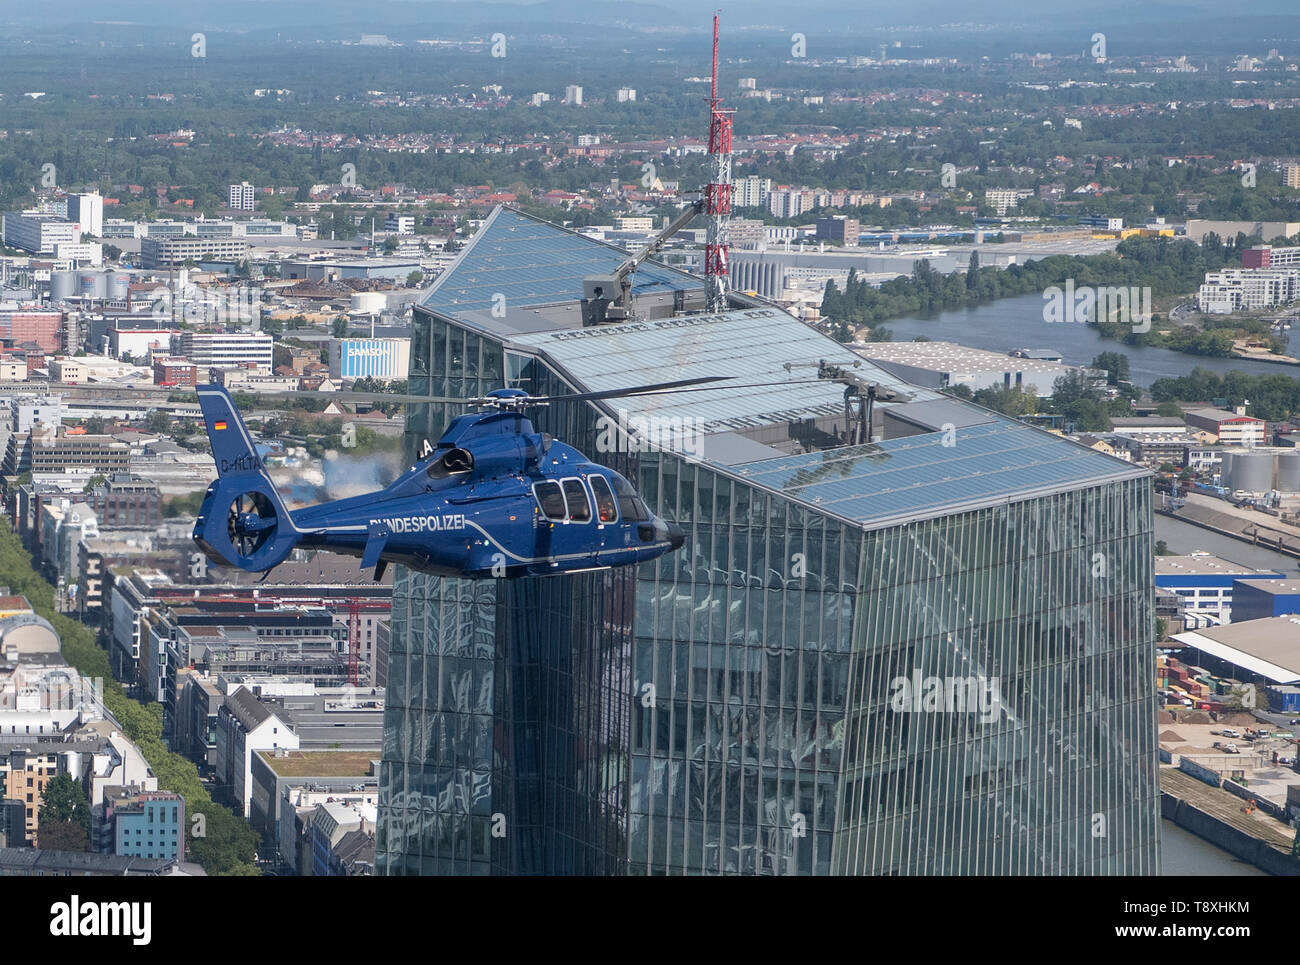 15 May 2019, Hessen, Frankfurt/Main: A Eurocopter EC 155 helicopter of the German Federal Police flies over the ECB in Frankfurt. The helicopters are ready for action within a very short time and can be used to prosecute perpetrators on the ground, to relocate special units or to monitor railway lines and airports. Photo: Boris Roessler/dpa Stock Photo